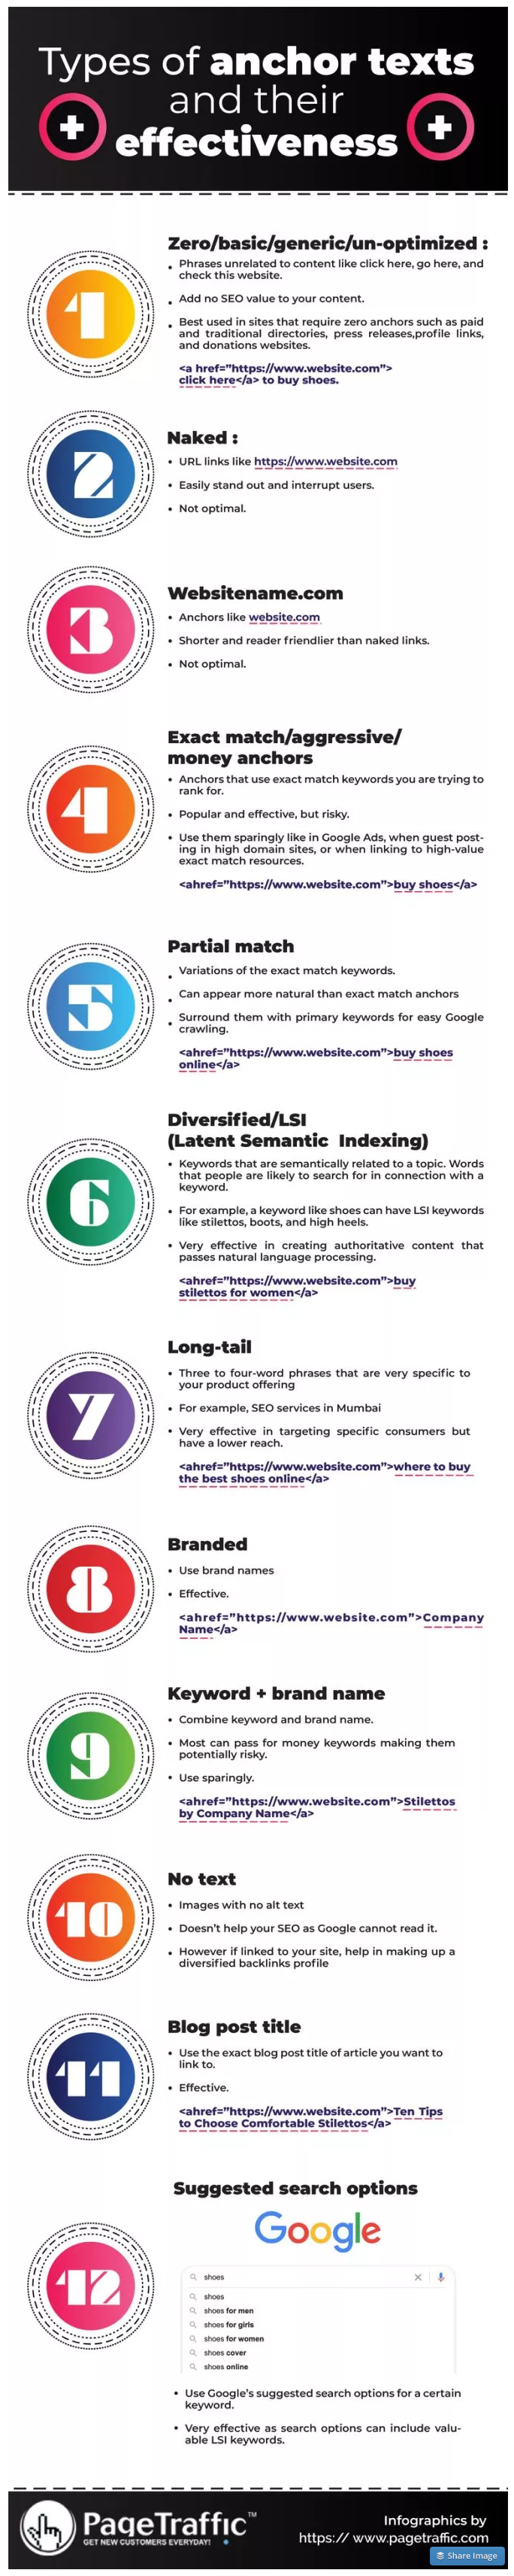 Best practices for Infographic SEO Infographic